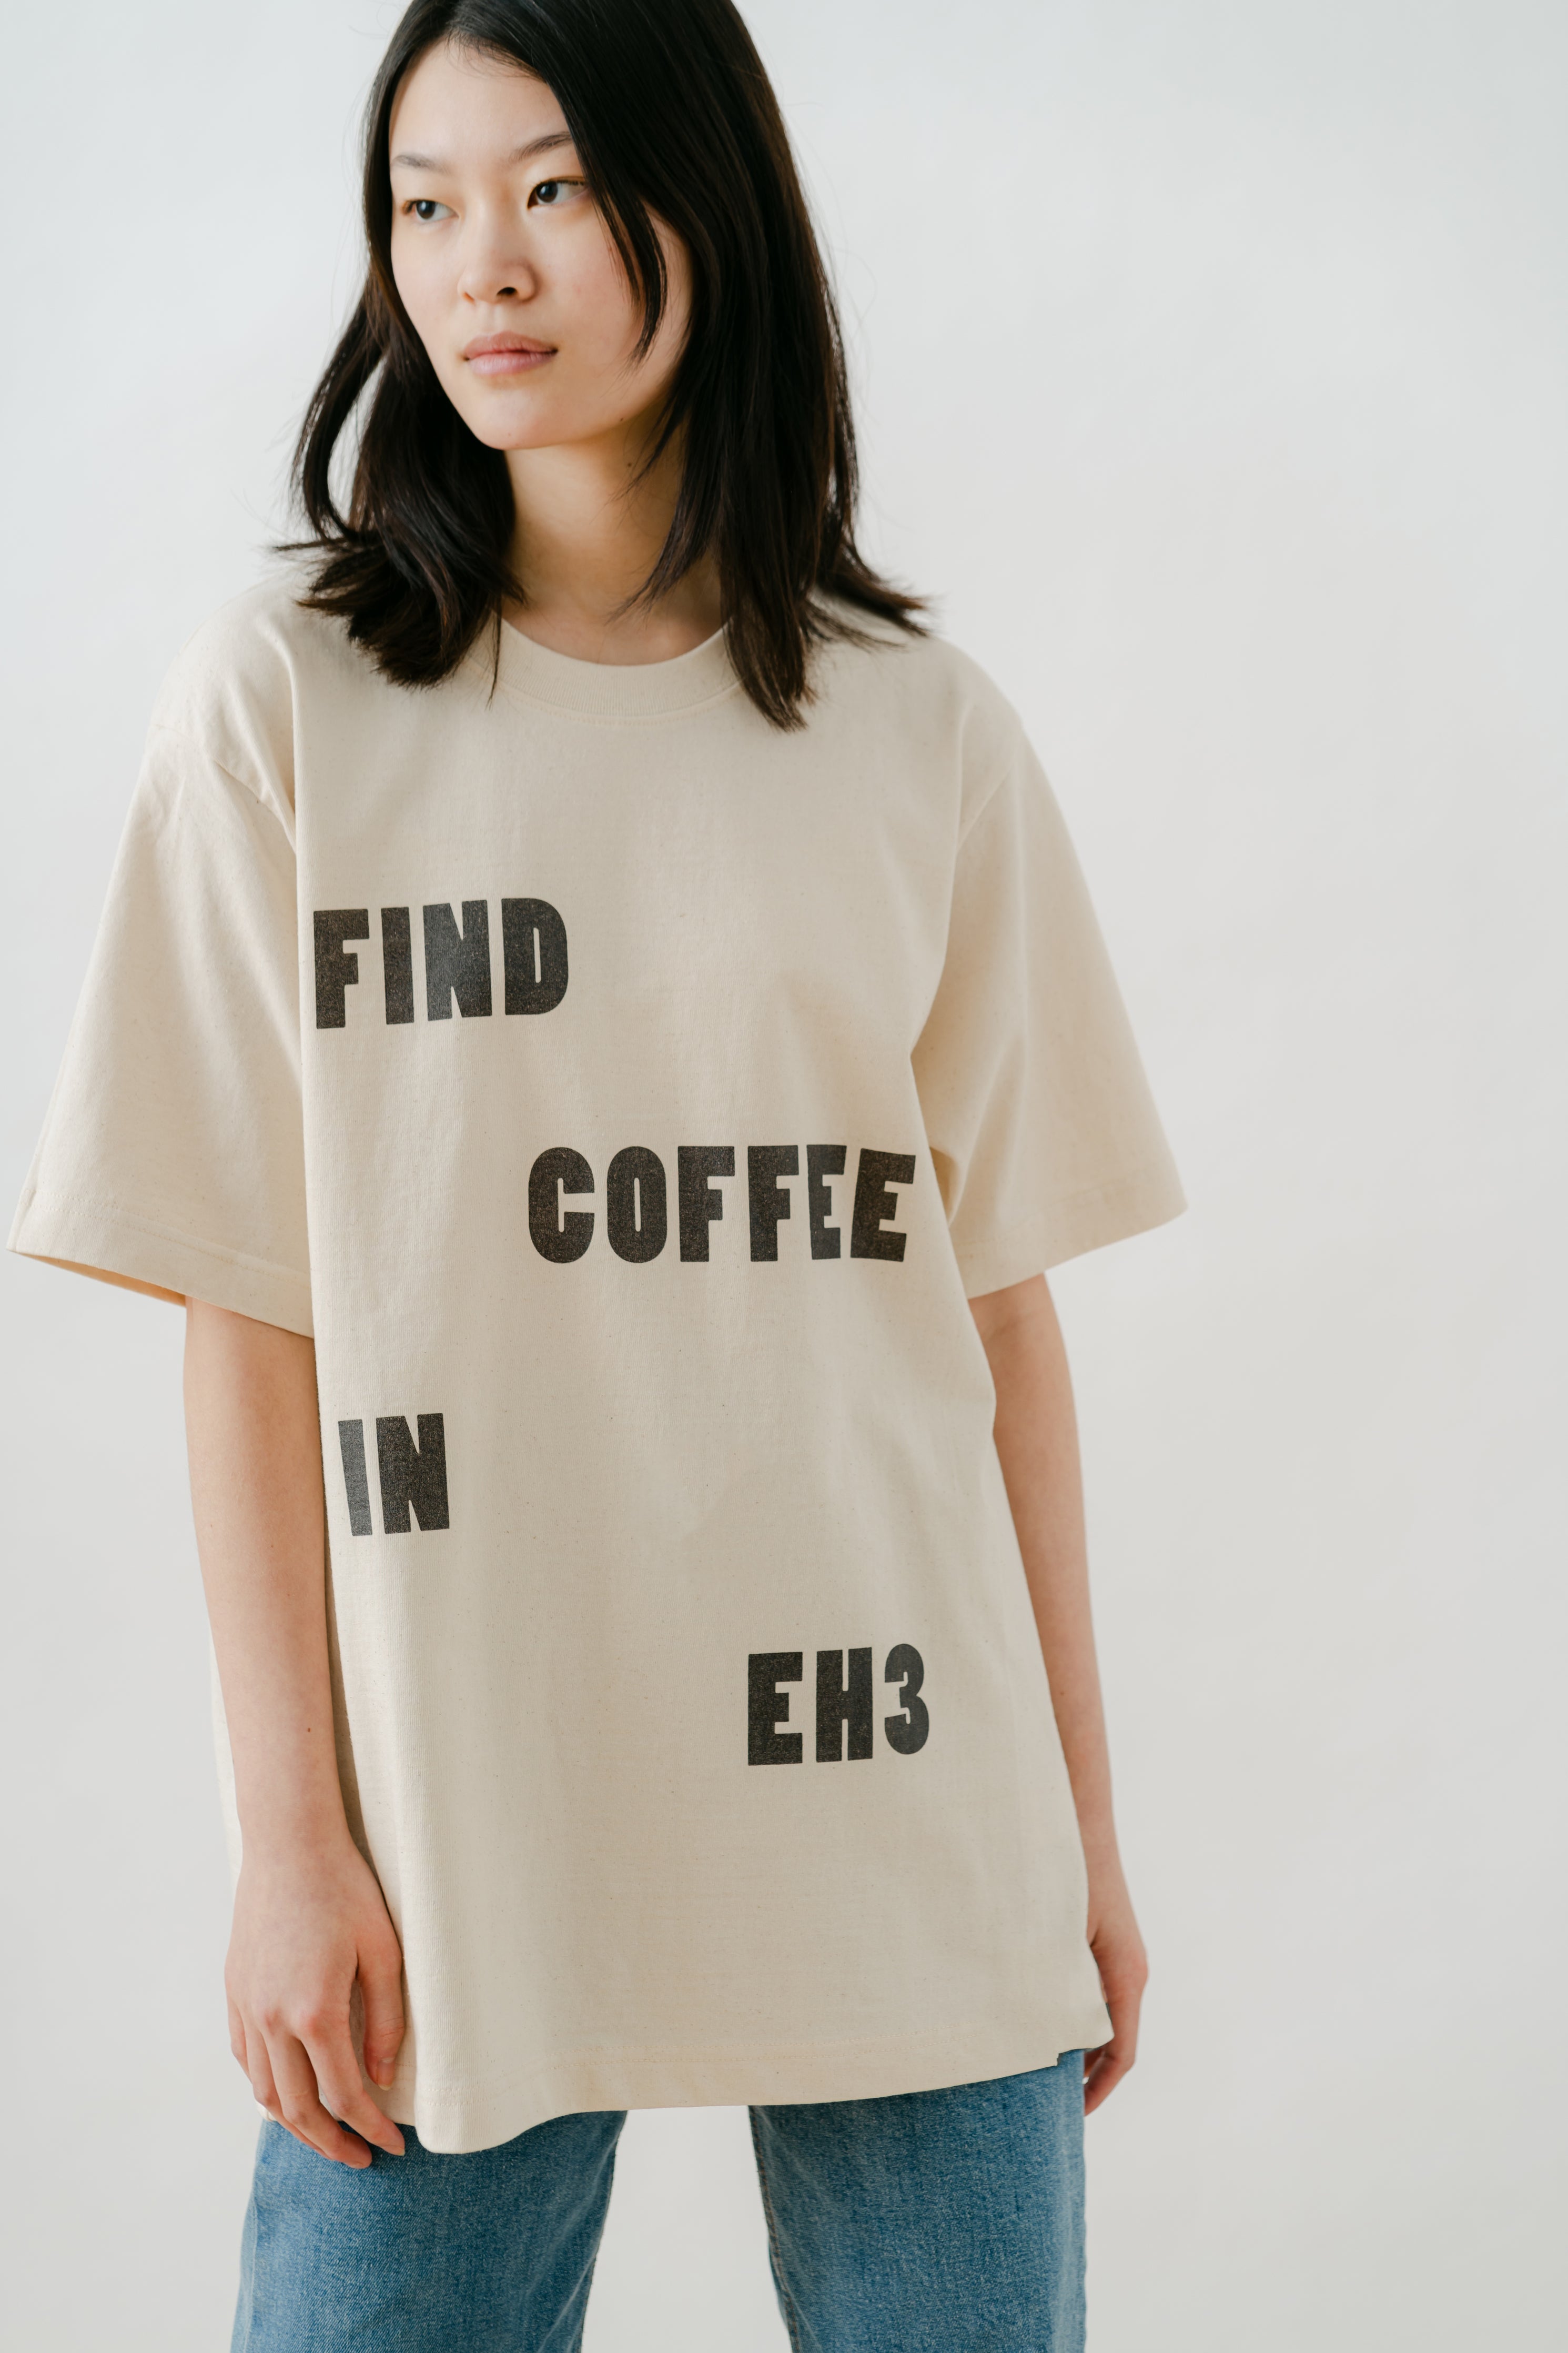 Find Coffee in EH3 Tee